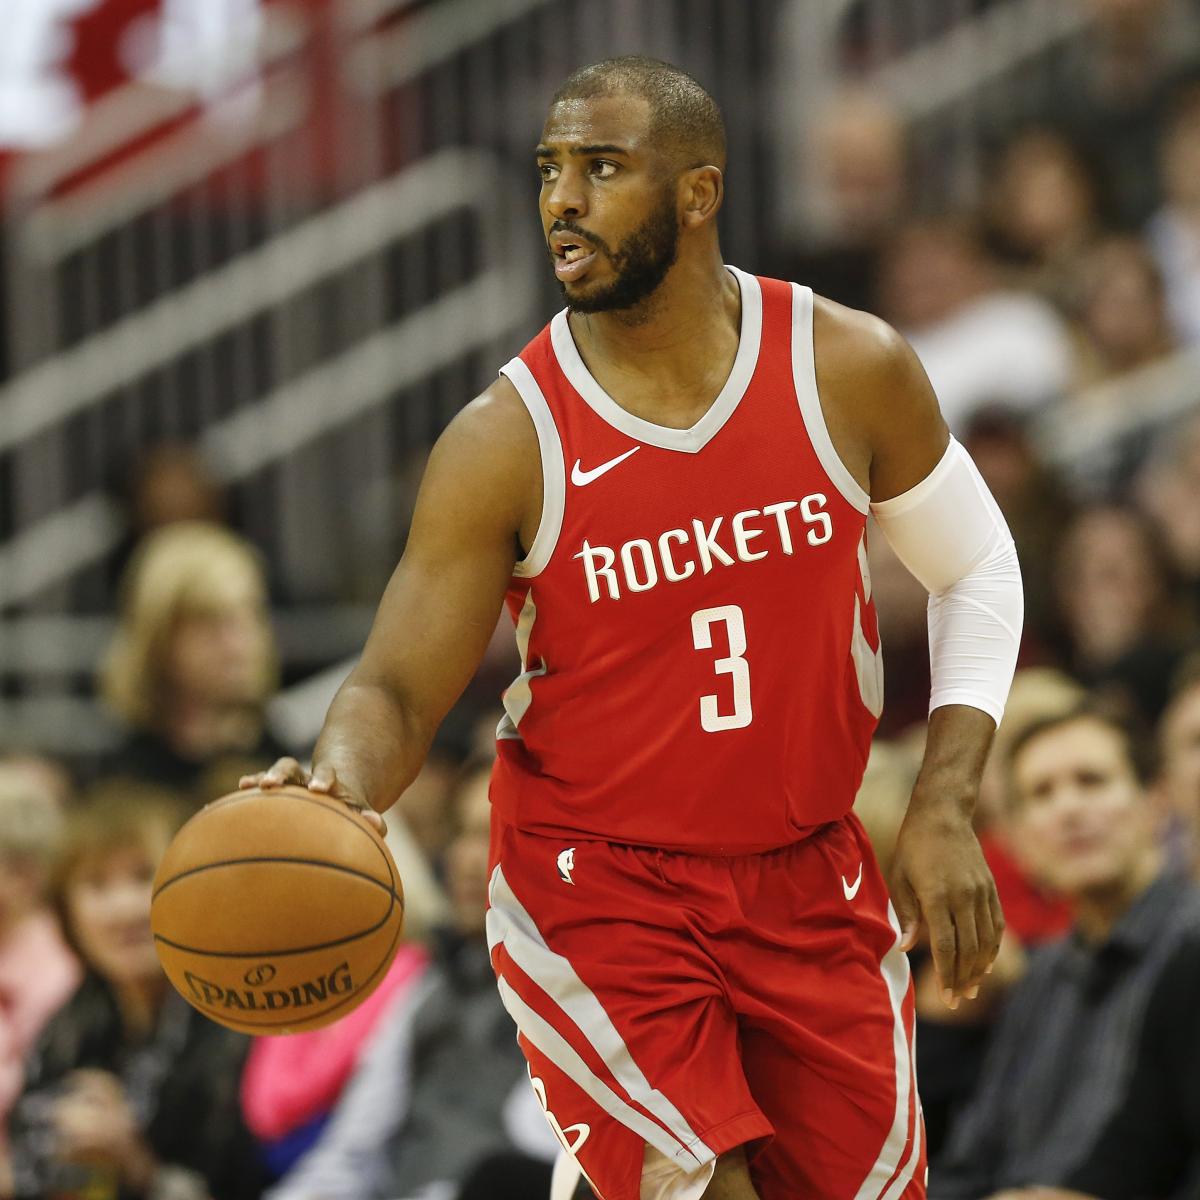 Rockets' Chris Paul expected to miss 2-4 weeks